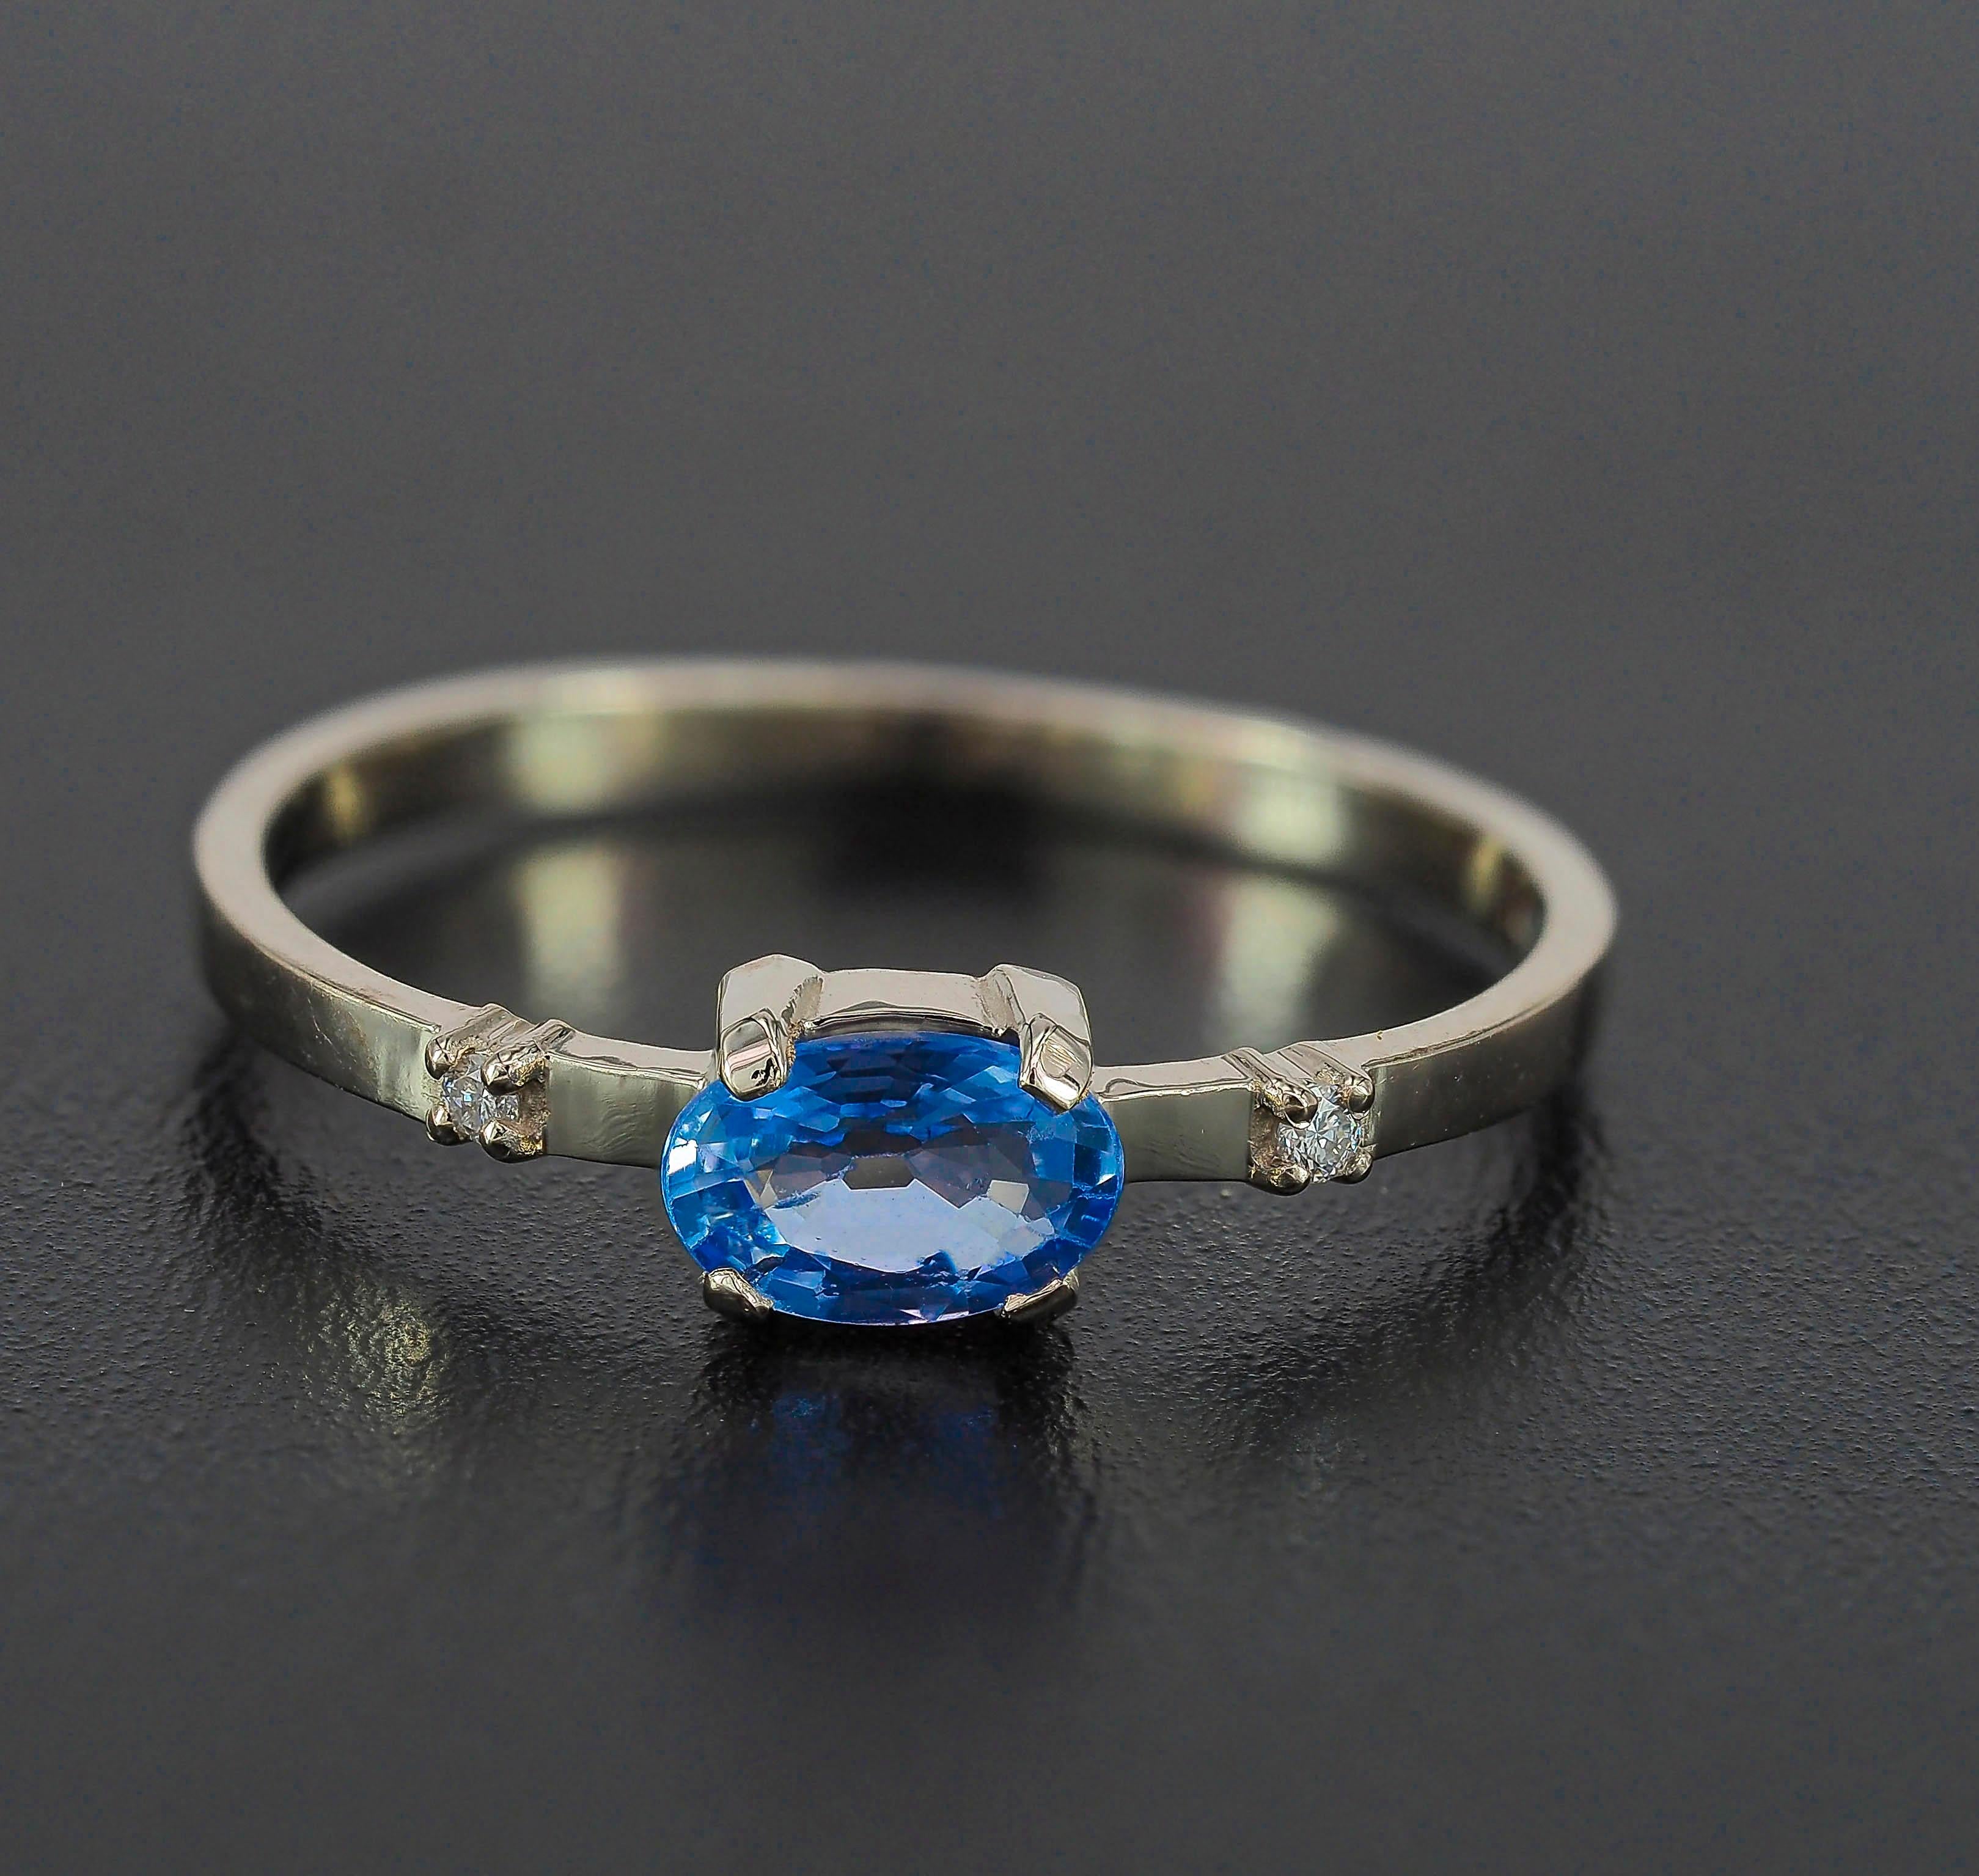 For Sale:  14k Gold Ring with Sapphire and Diamonds 3